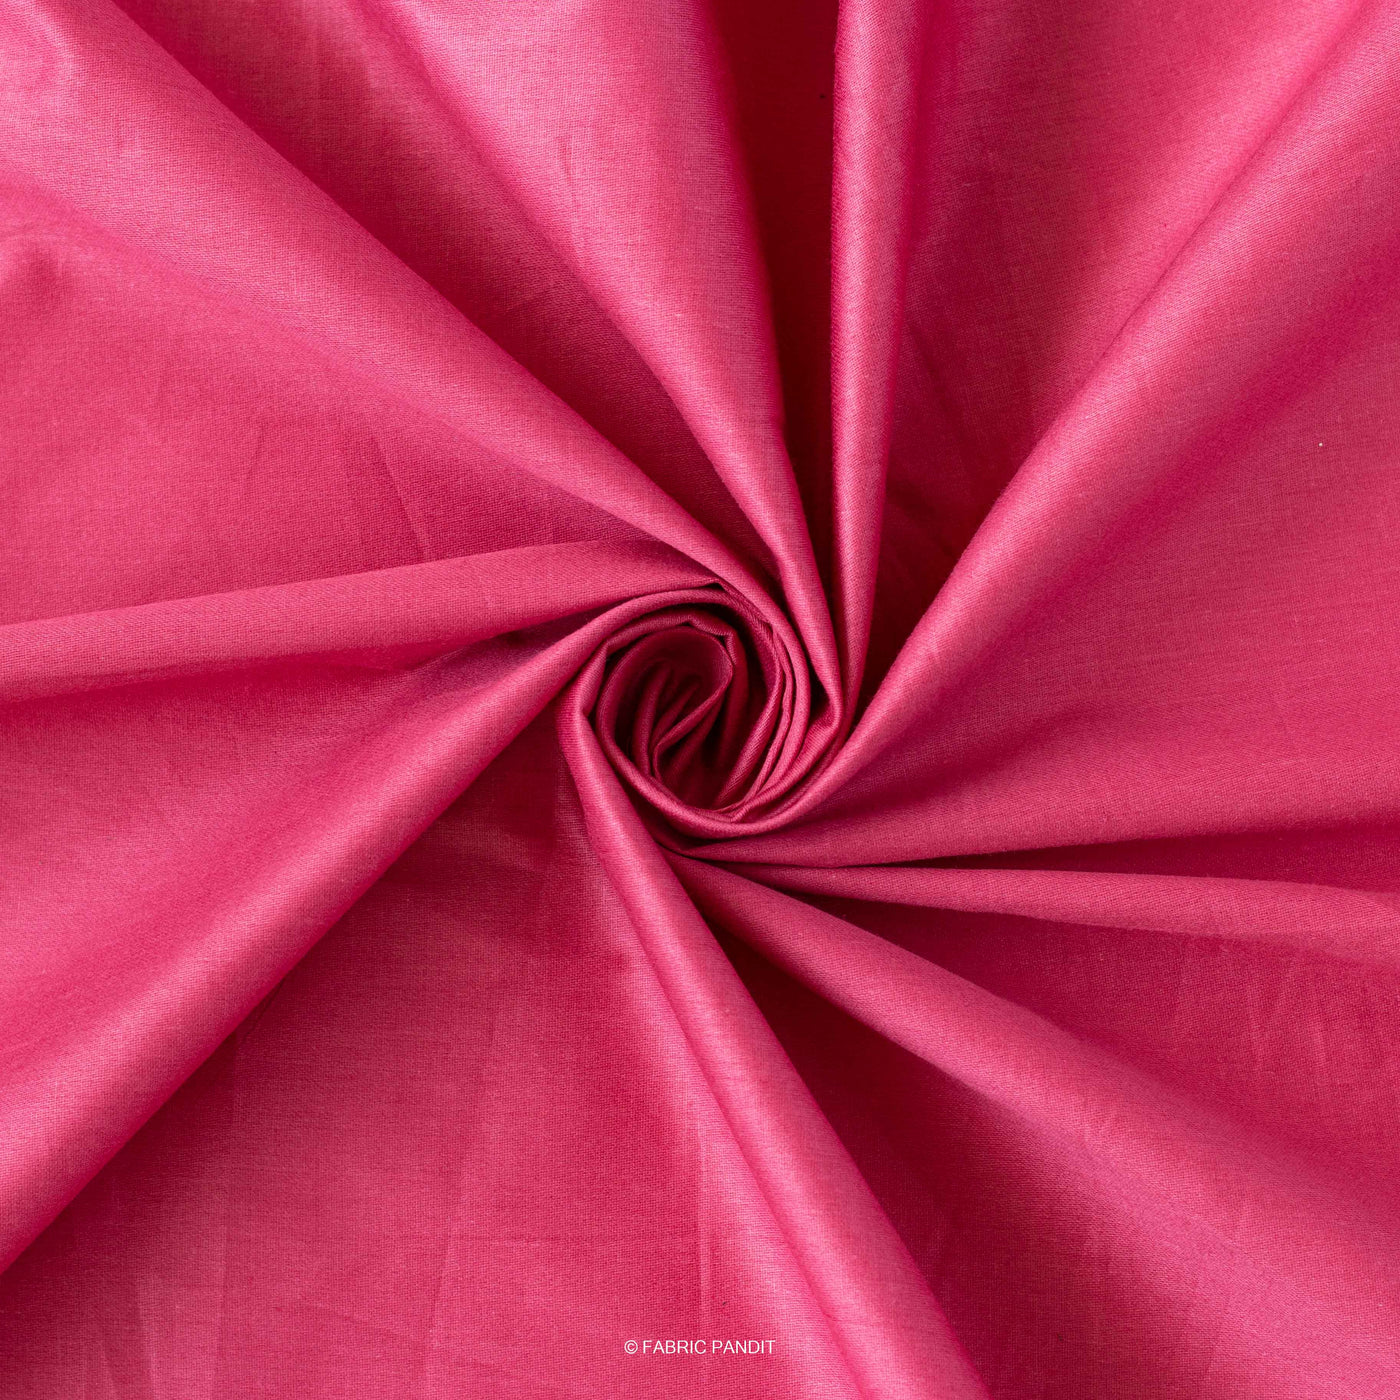 Rose Pink Color Plain Cotton Satin Fabric (Width 42 Inches) – Fabric Pandit